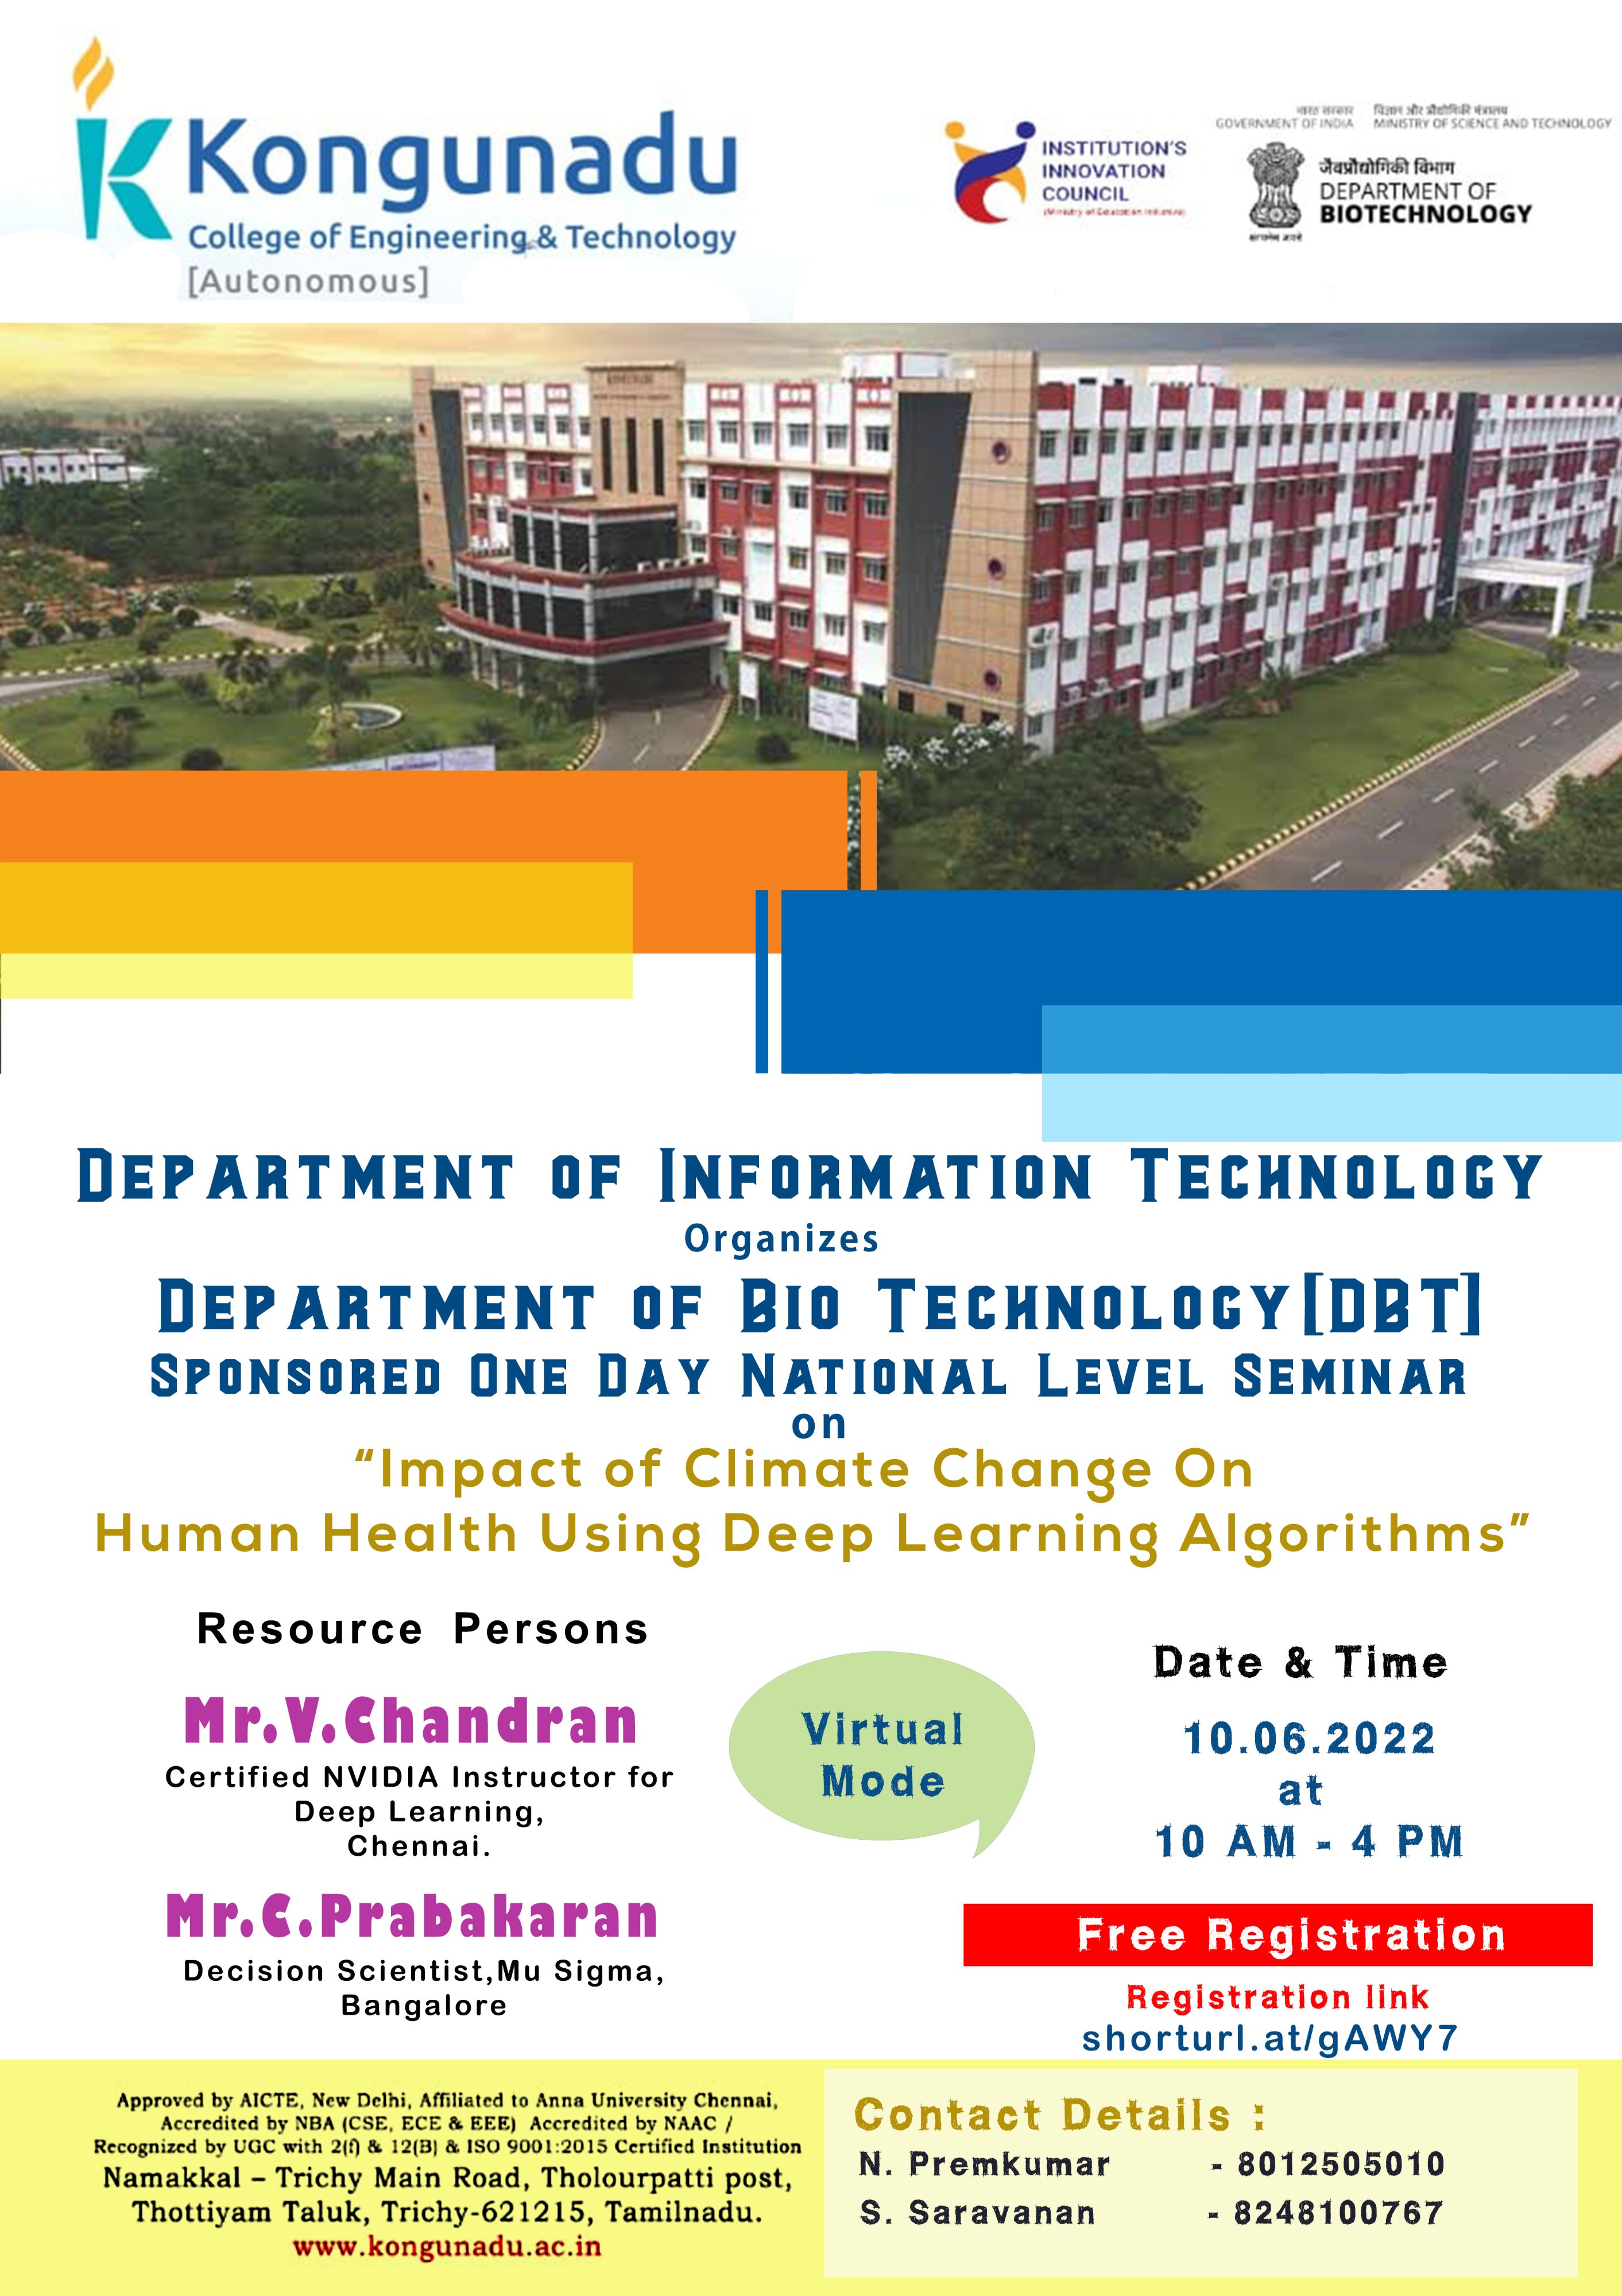 One Day National Level Seminar on Impact of Climate Change on Human Health using Deep Learning algorithms 2022